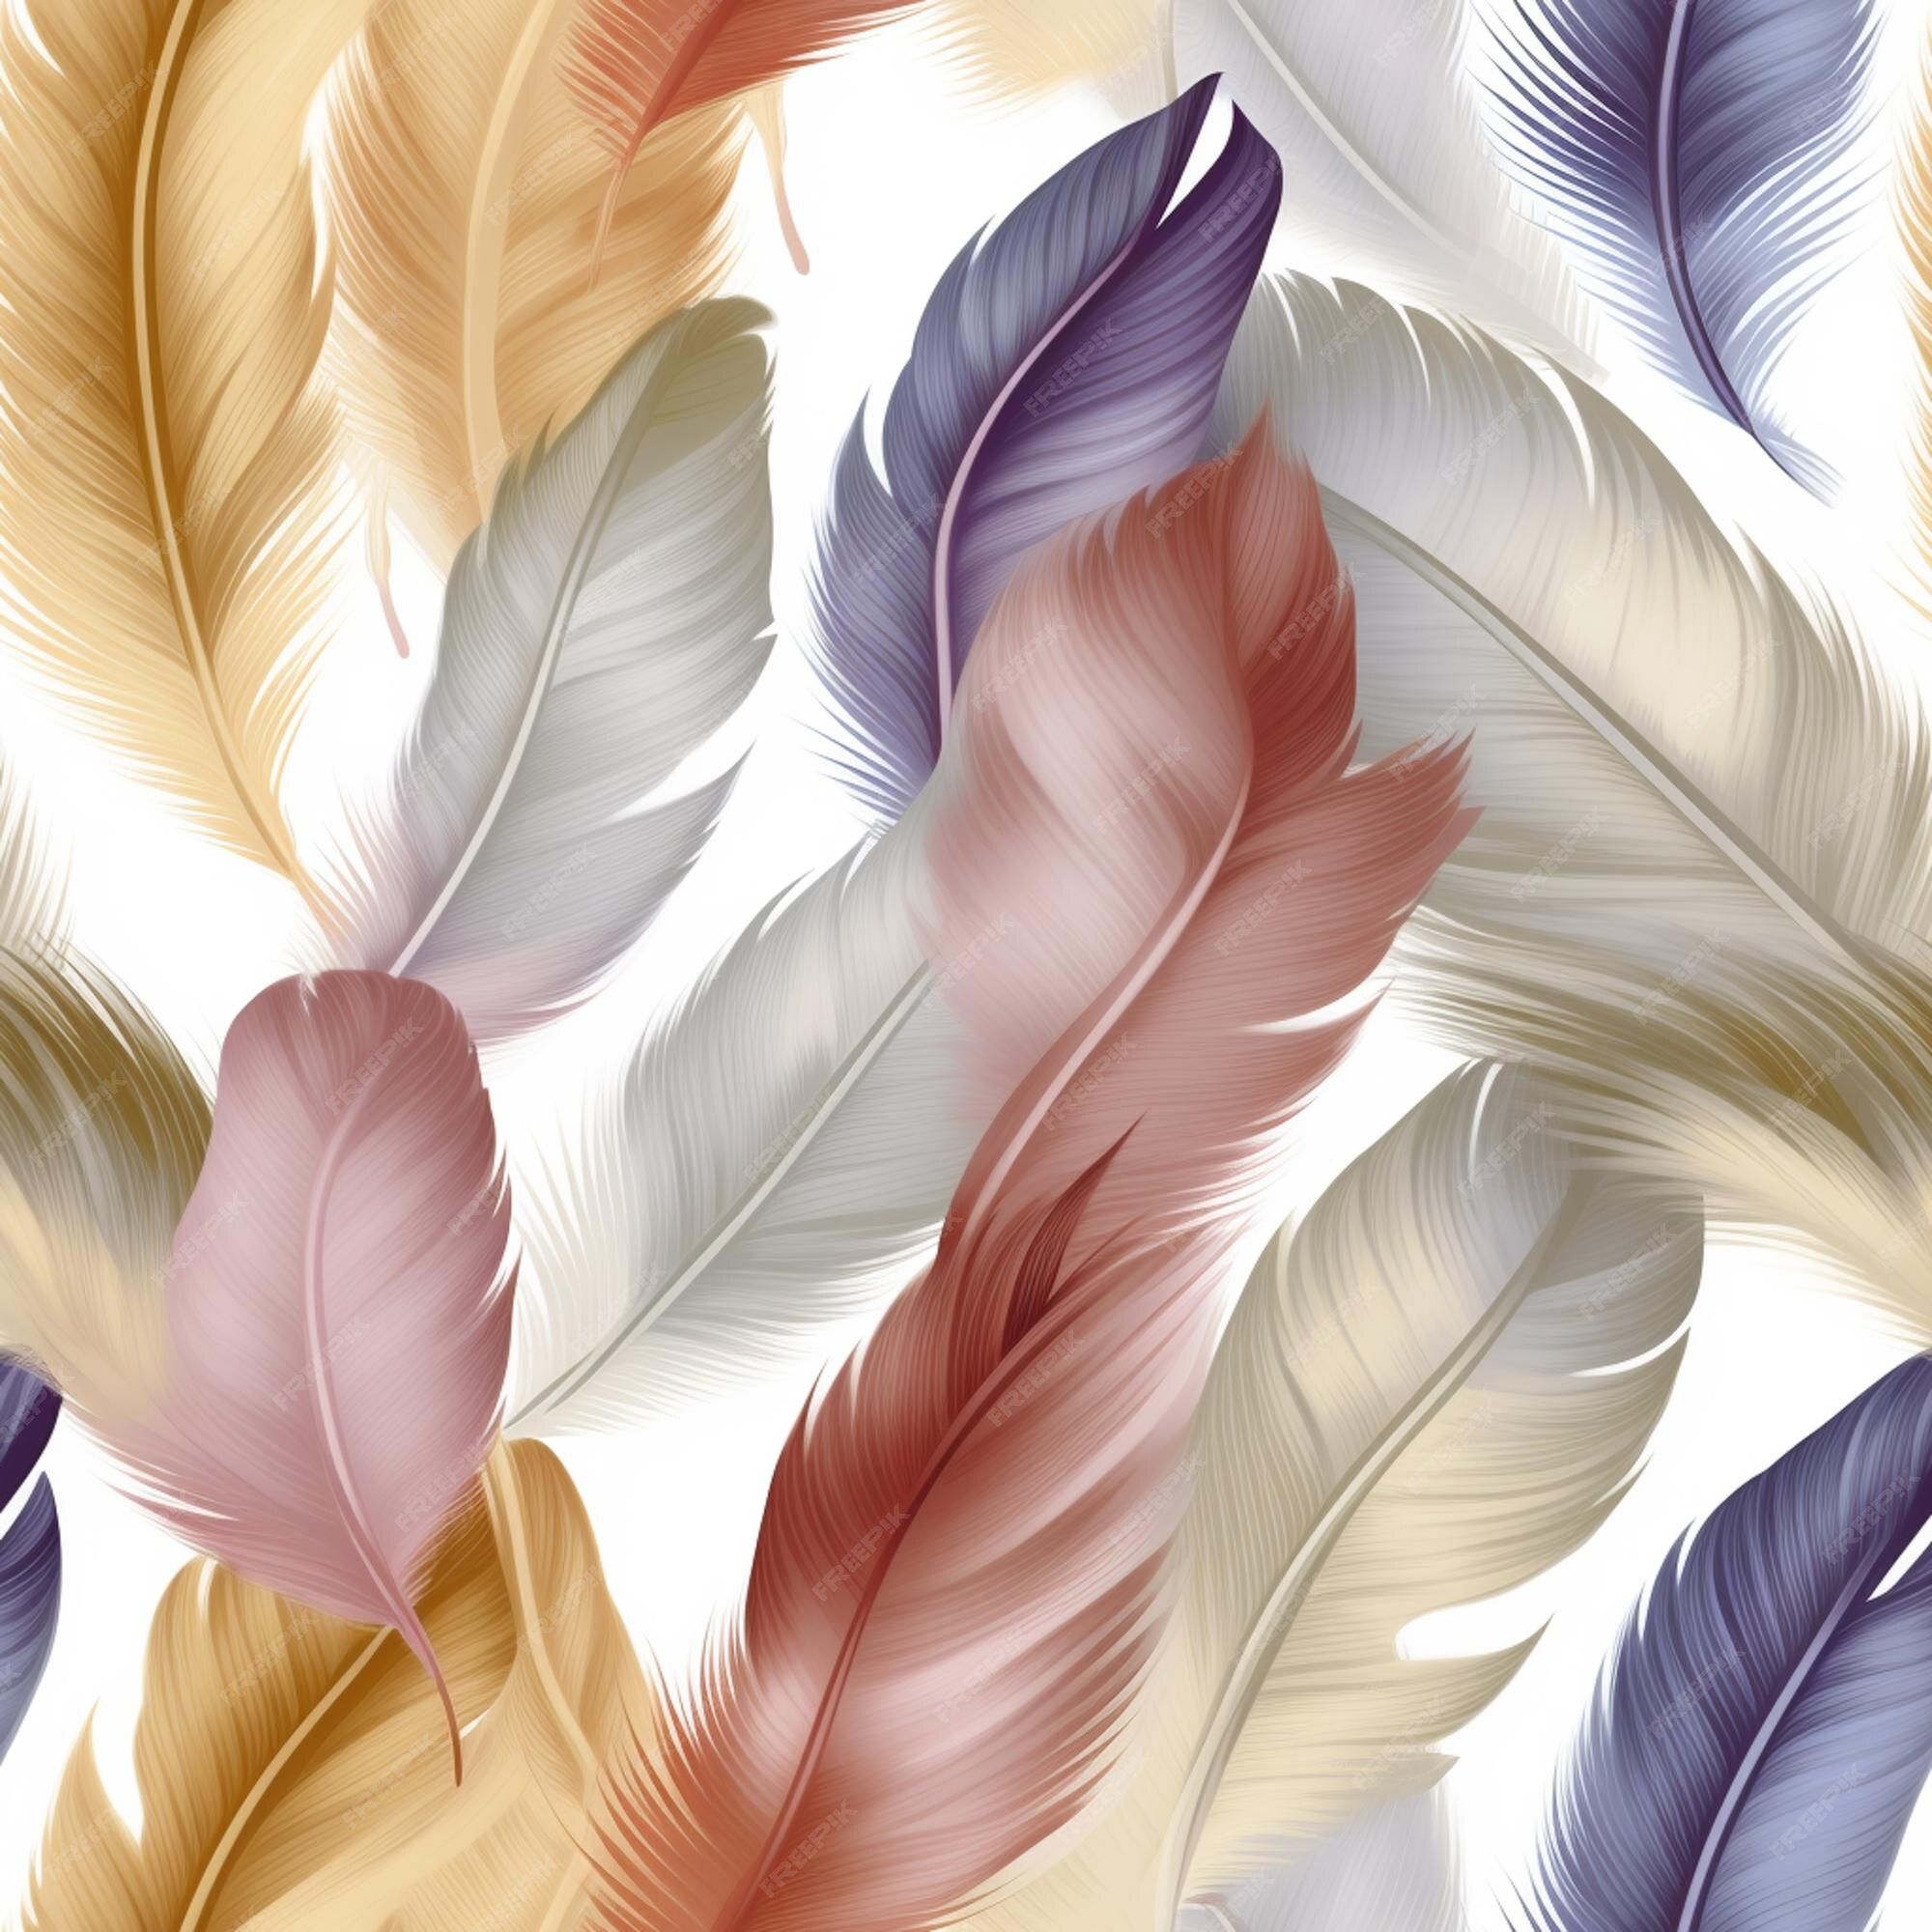 A seamless pattern of colorful feathers on a white background. - Feathers